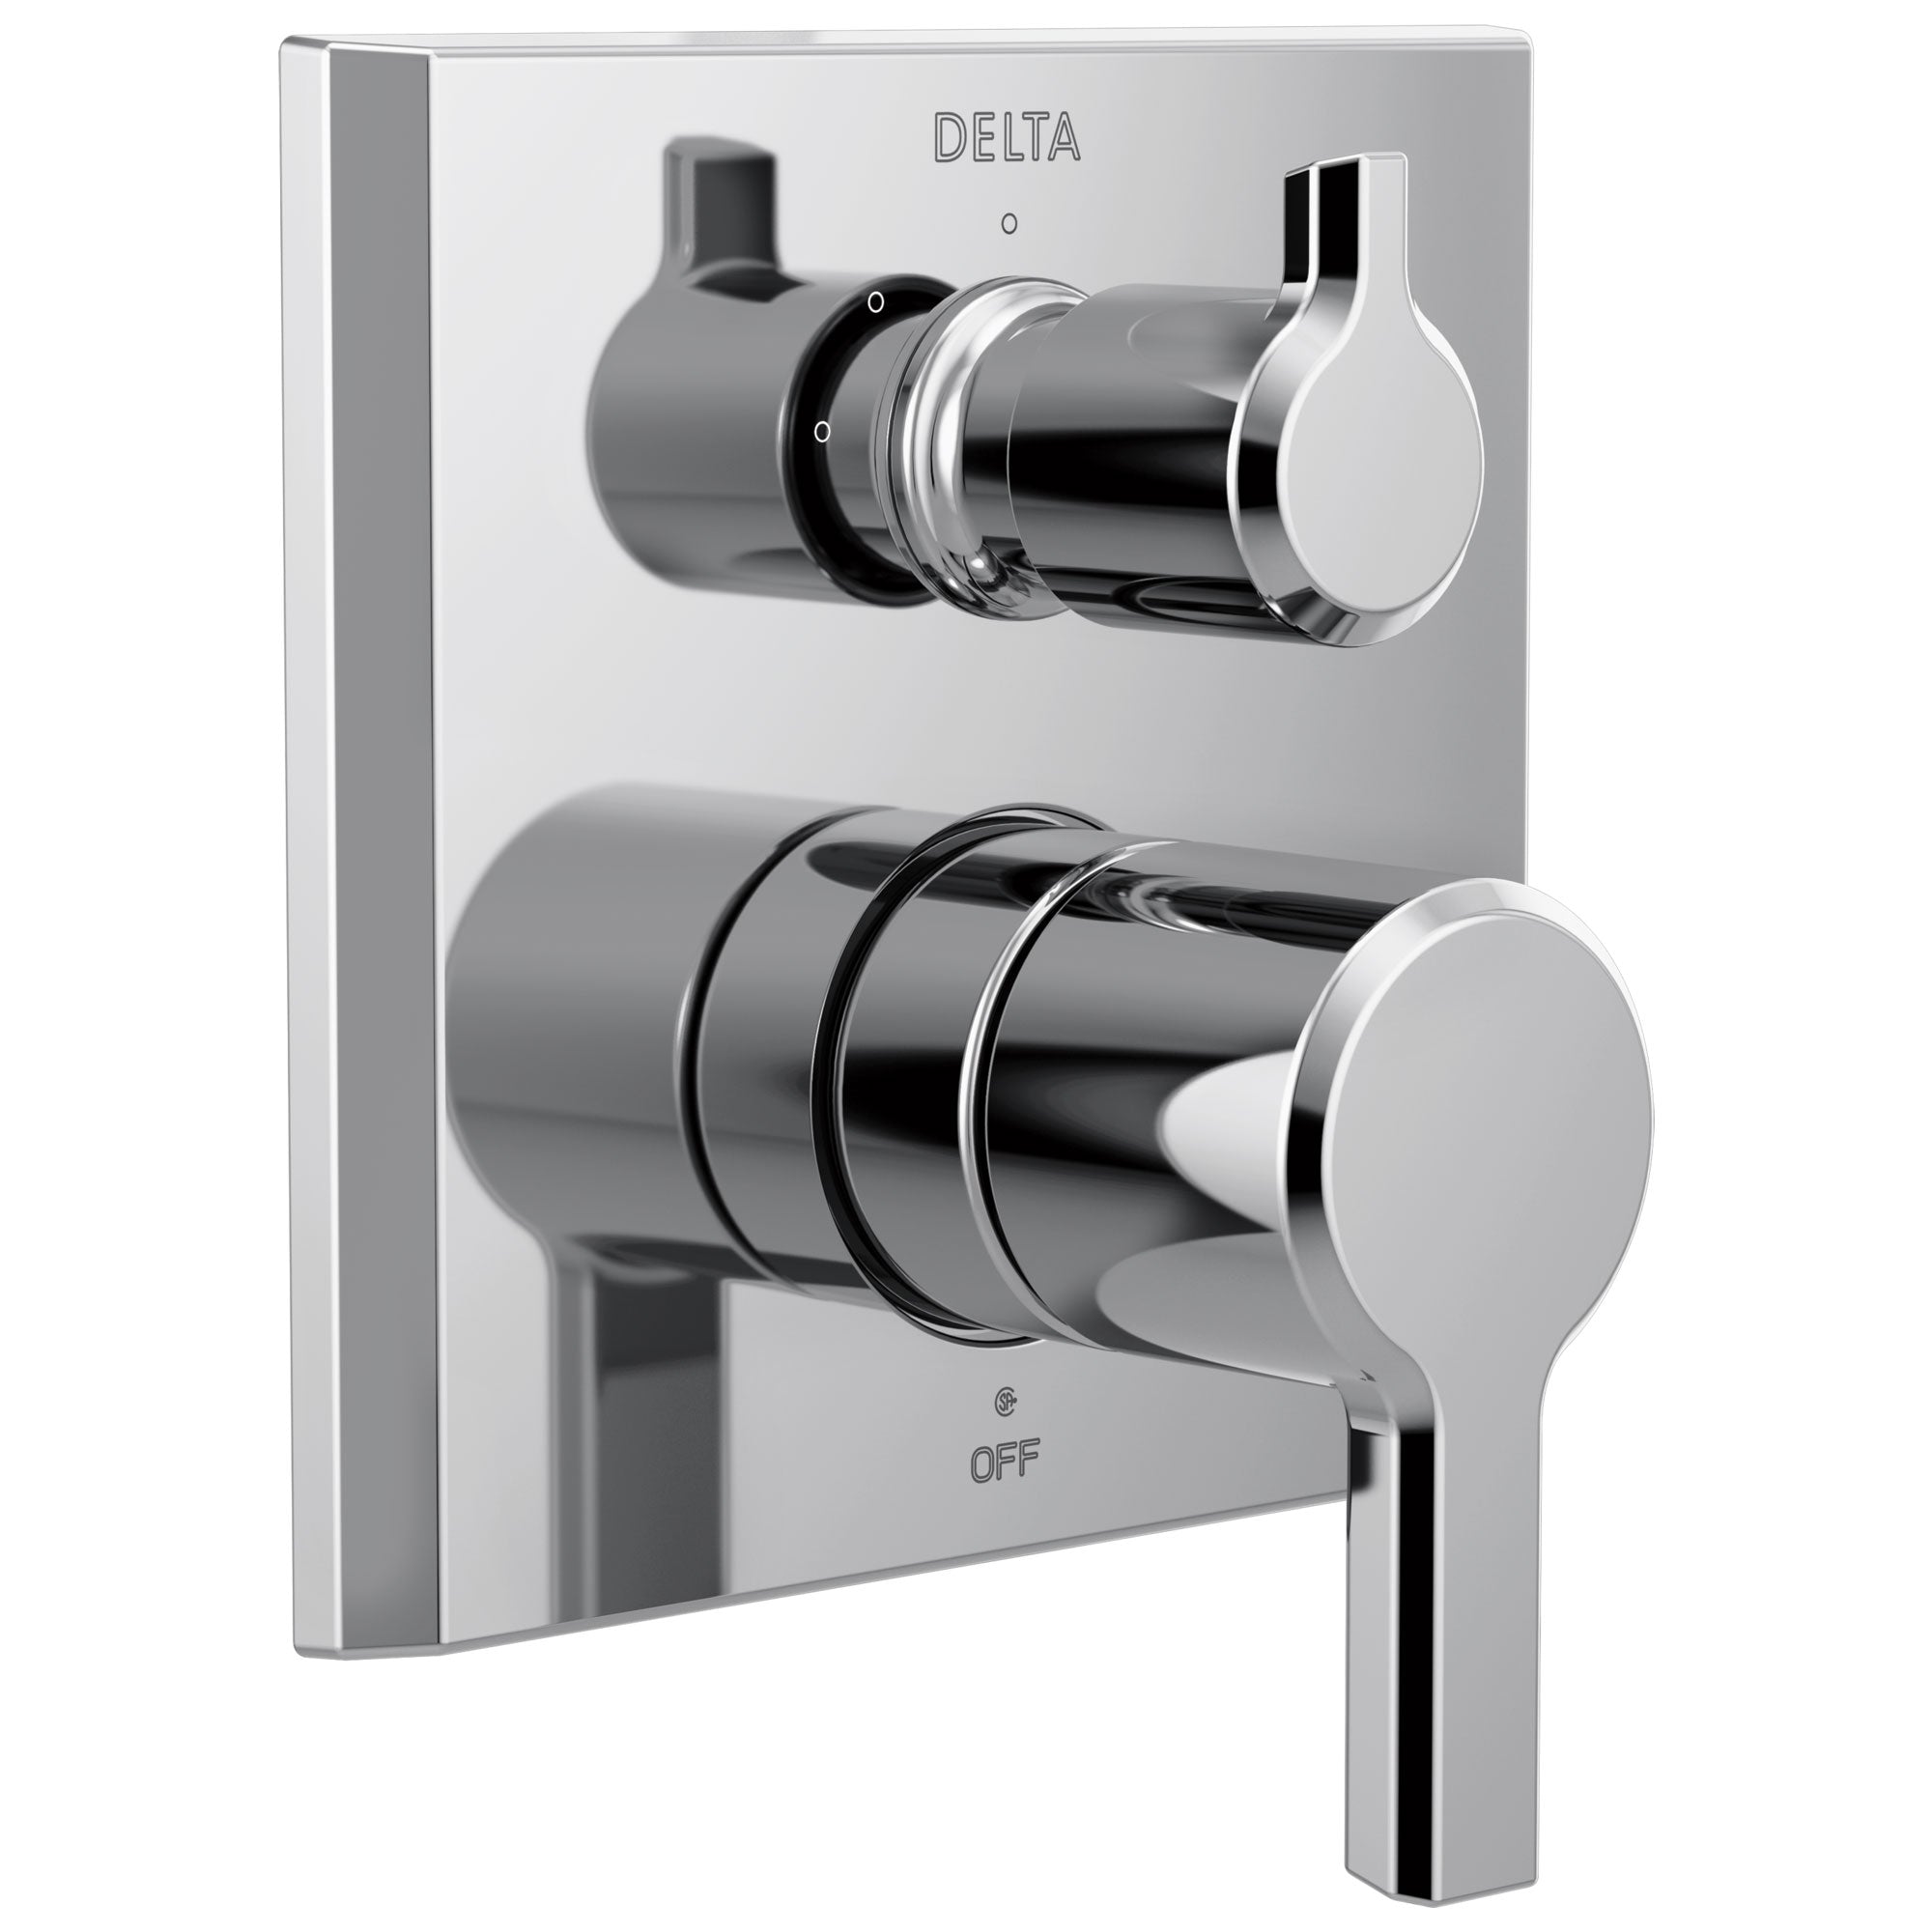 Delta Pivotal Chrome Finish 2-Handle Monitor 14 Series Shower Control Trim Kit with 3-Setting Integrated Diverter (Requires Valve) DT24899